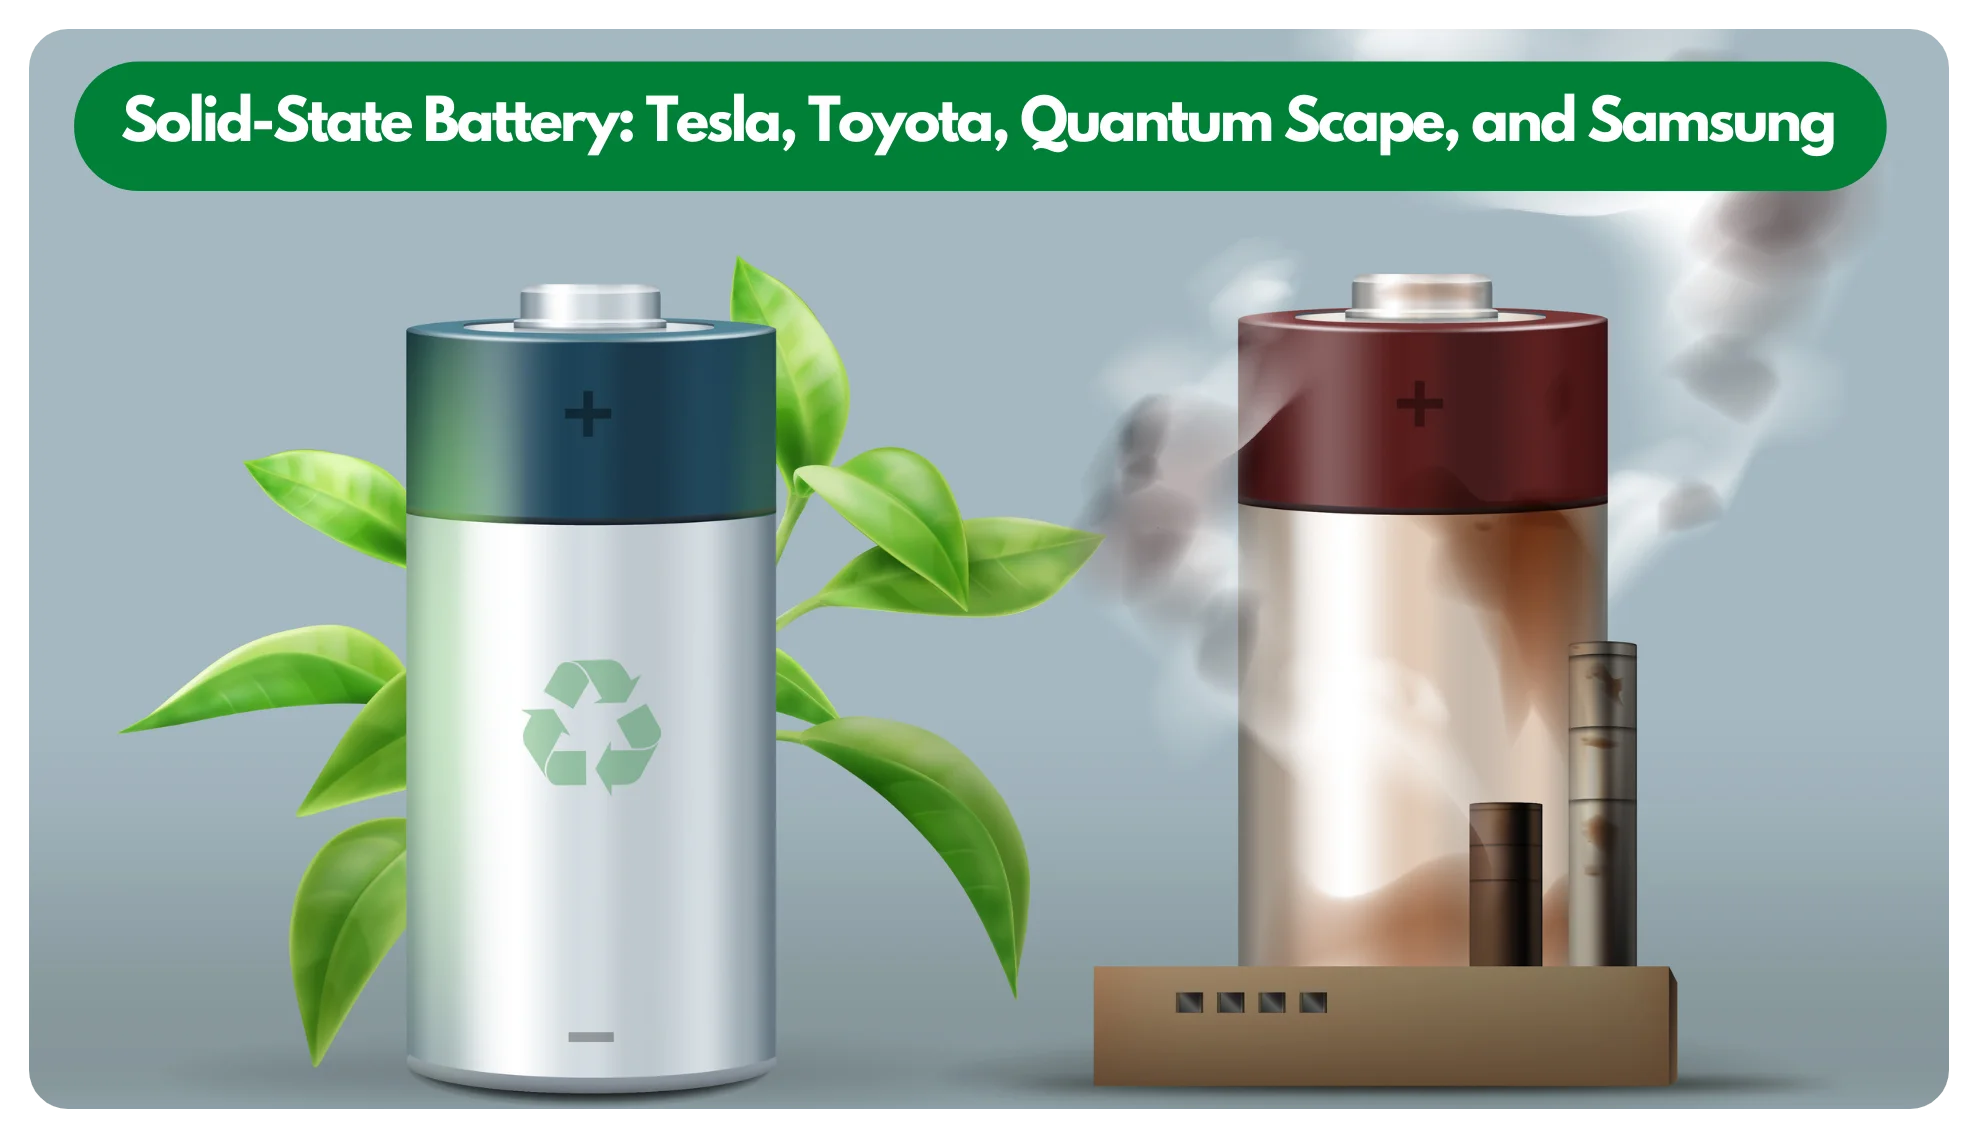 https://e-vehicleinfo.com/solid-state-batteries-tesla-toyota-quantum-scape-and-samsung/